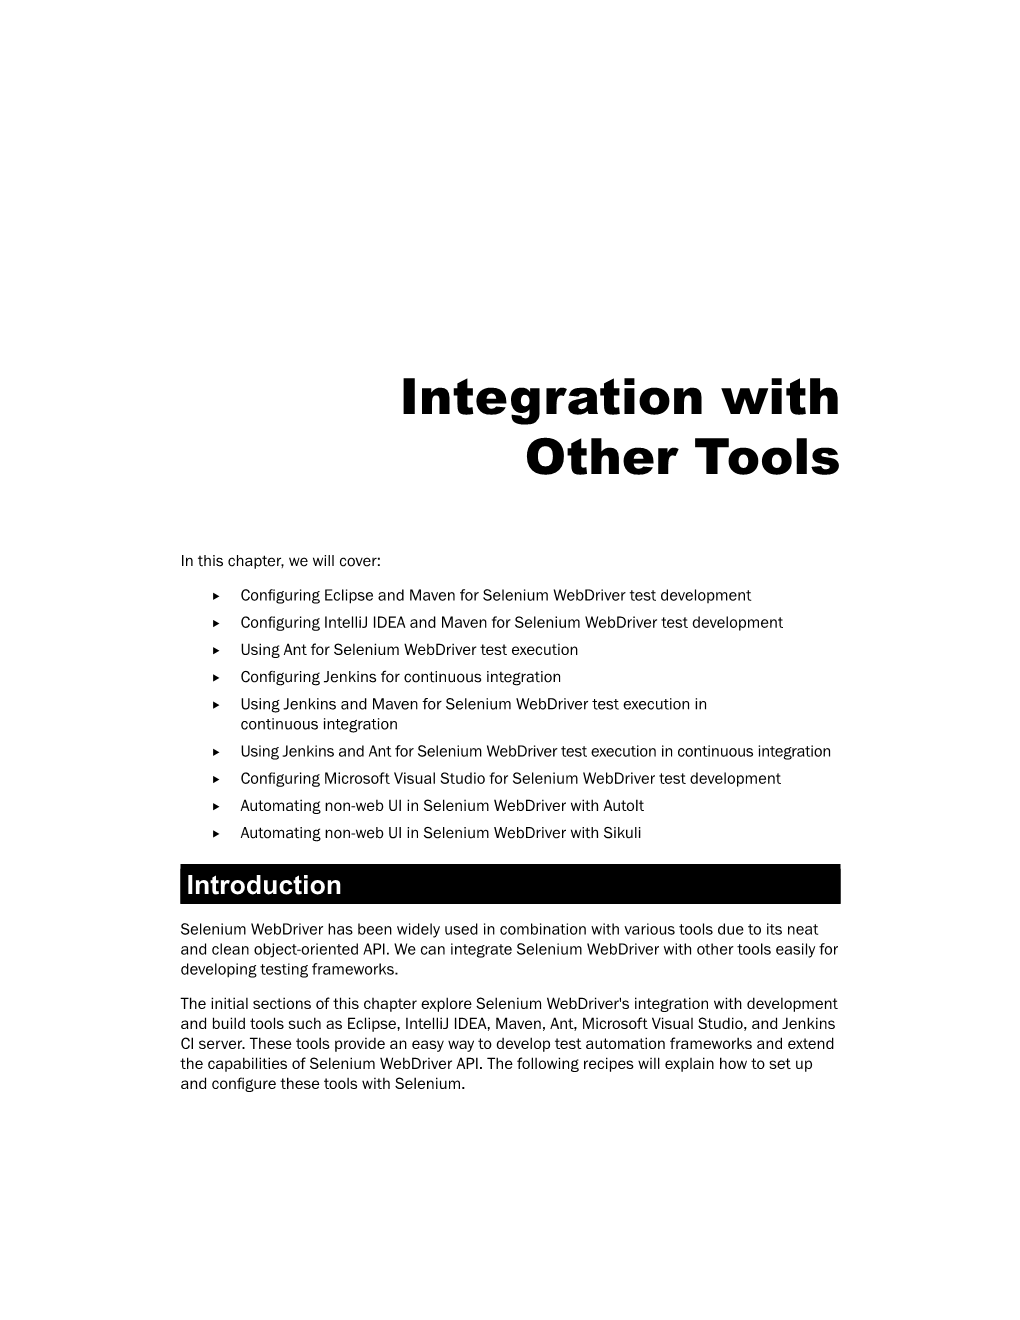 Integration with Other Tools